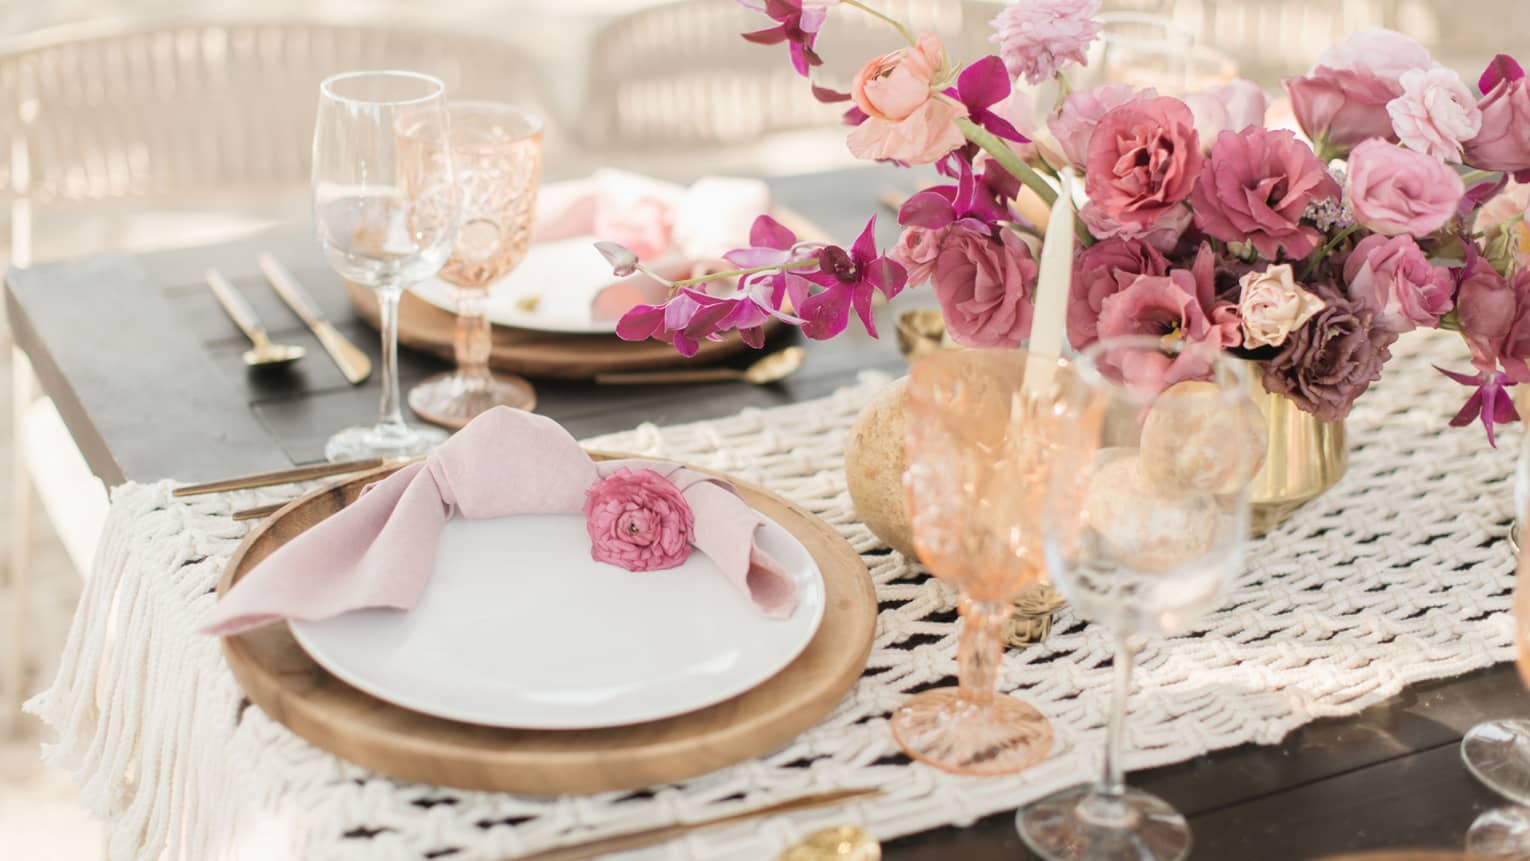 A table with wedding decorations of white plates, wine glasses, and light red and pink roses.